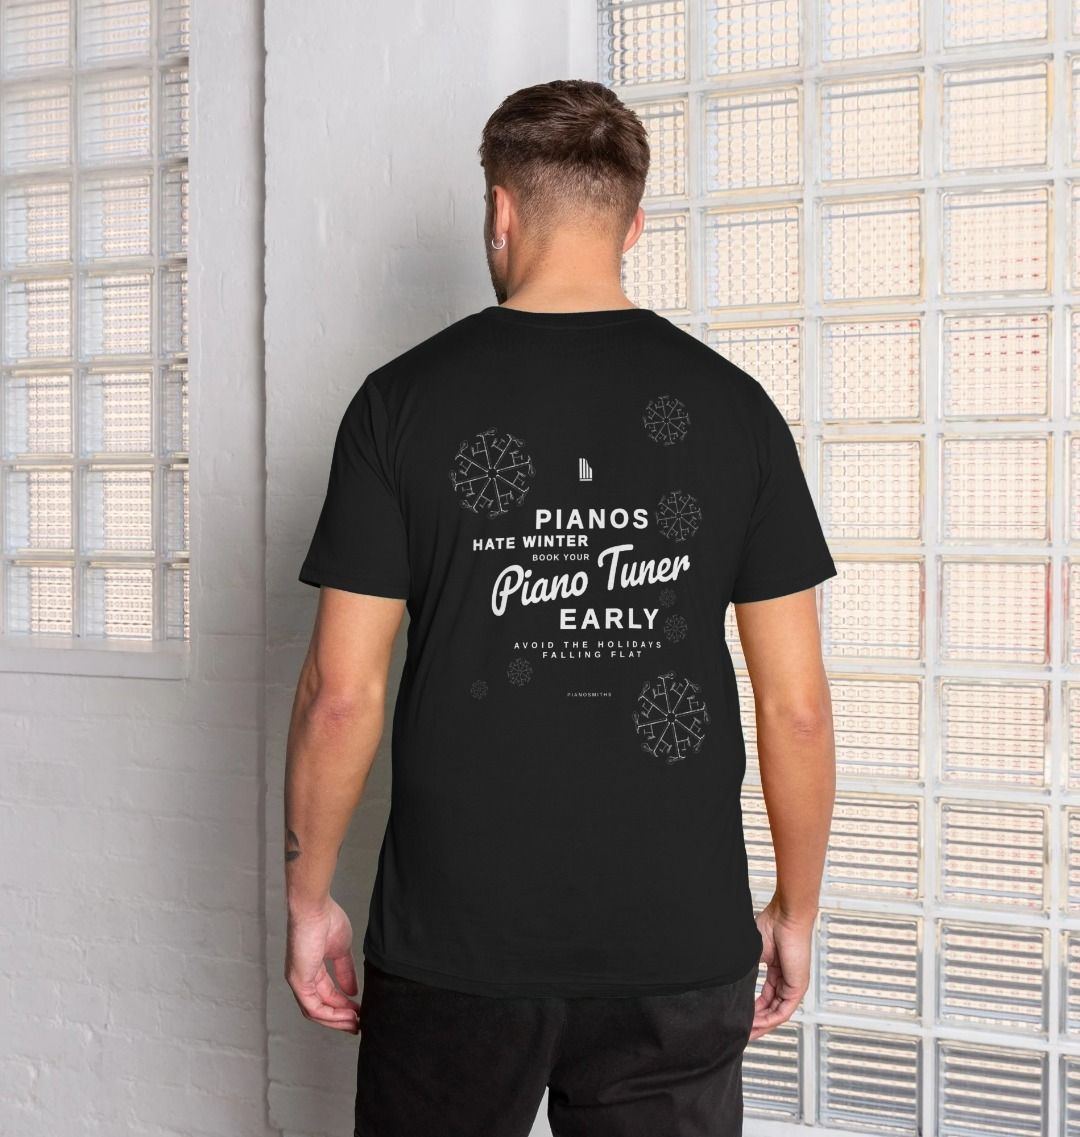 Pianos Hate Winter T-Shirt in Black